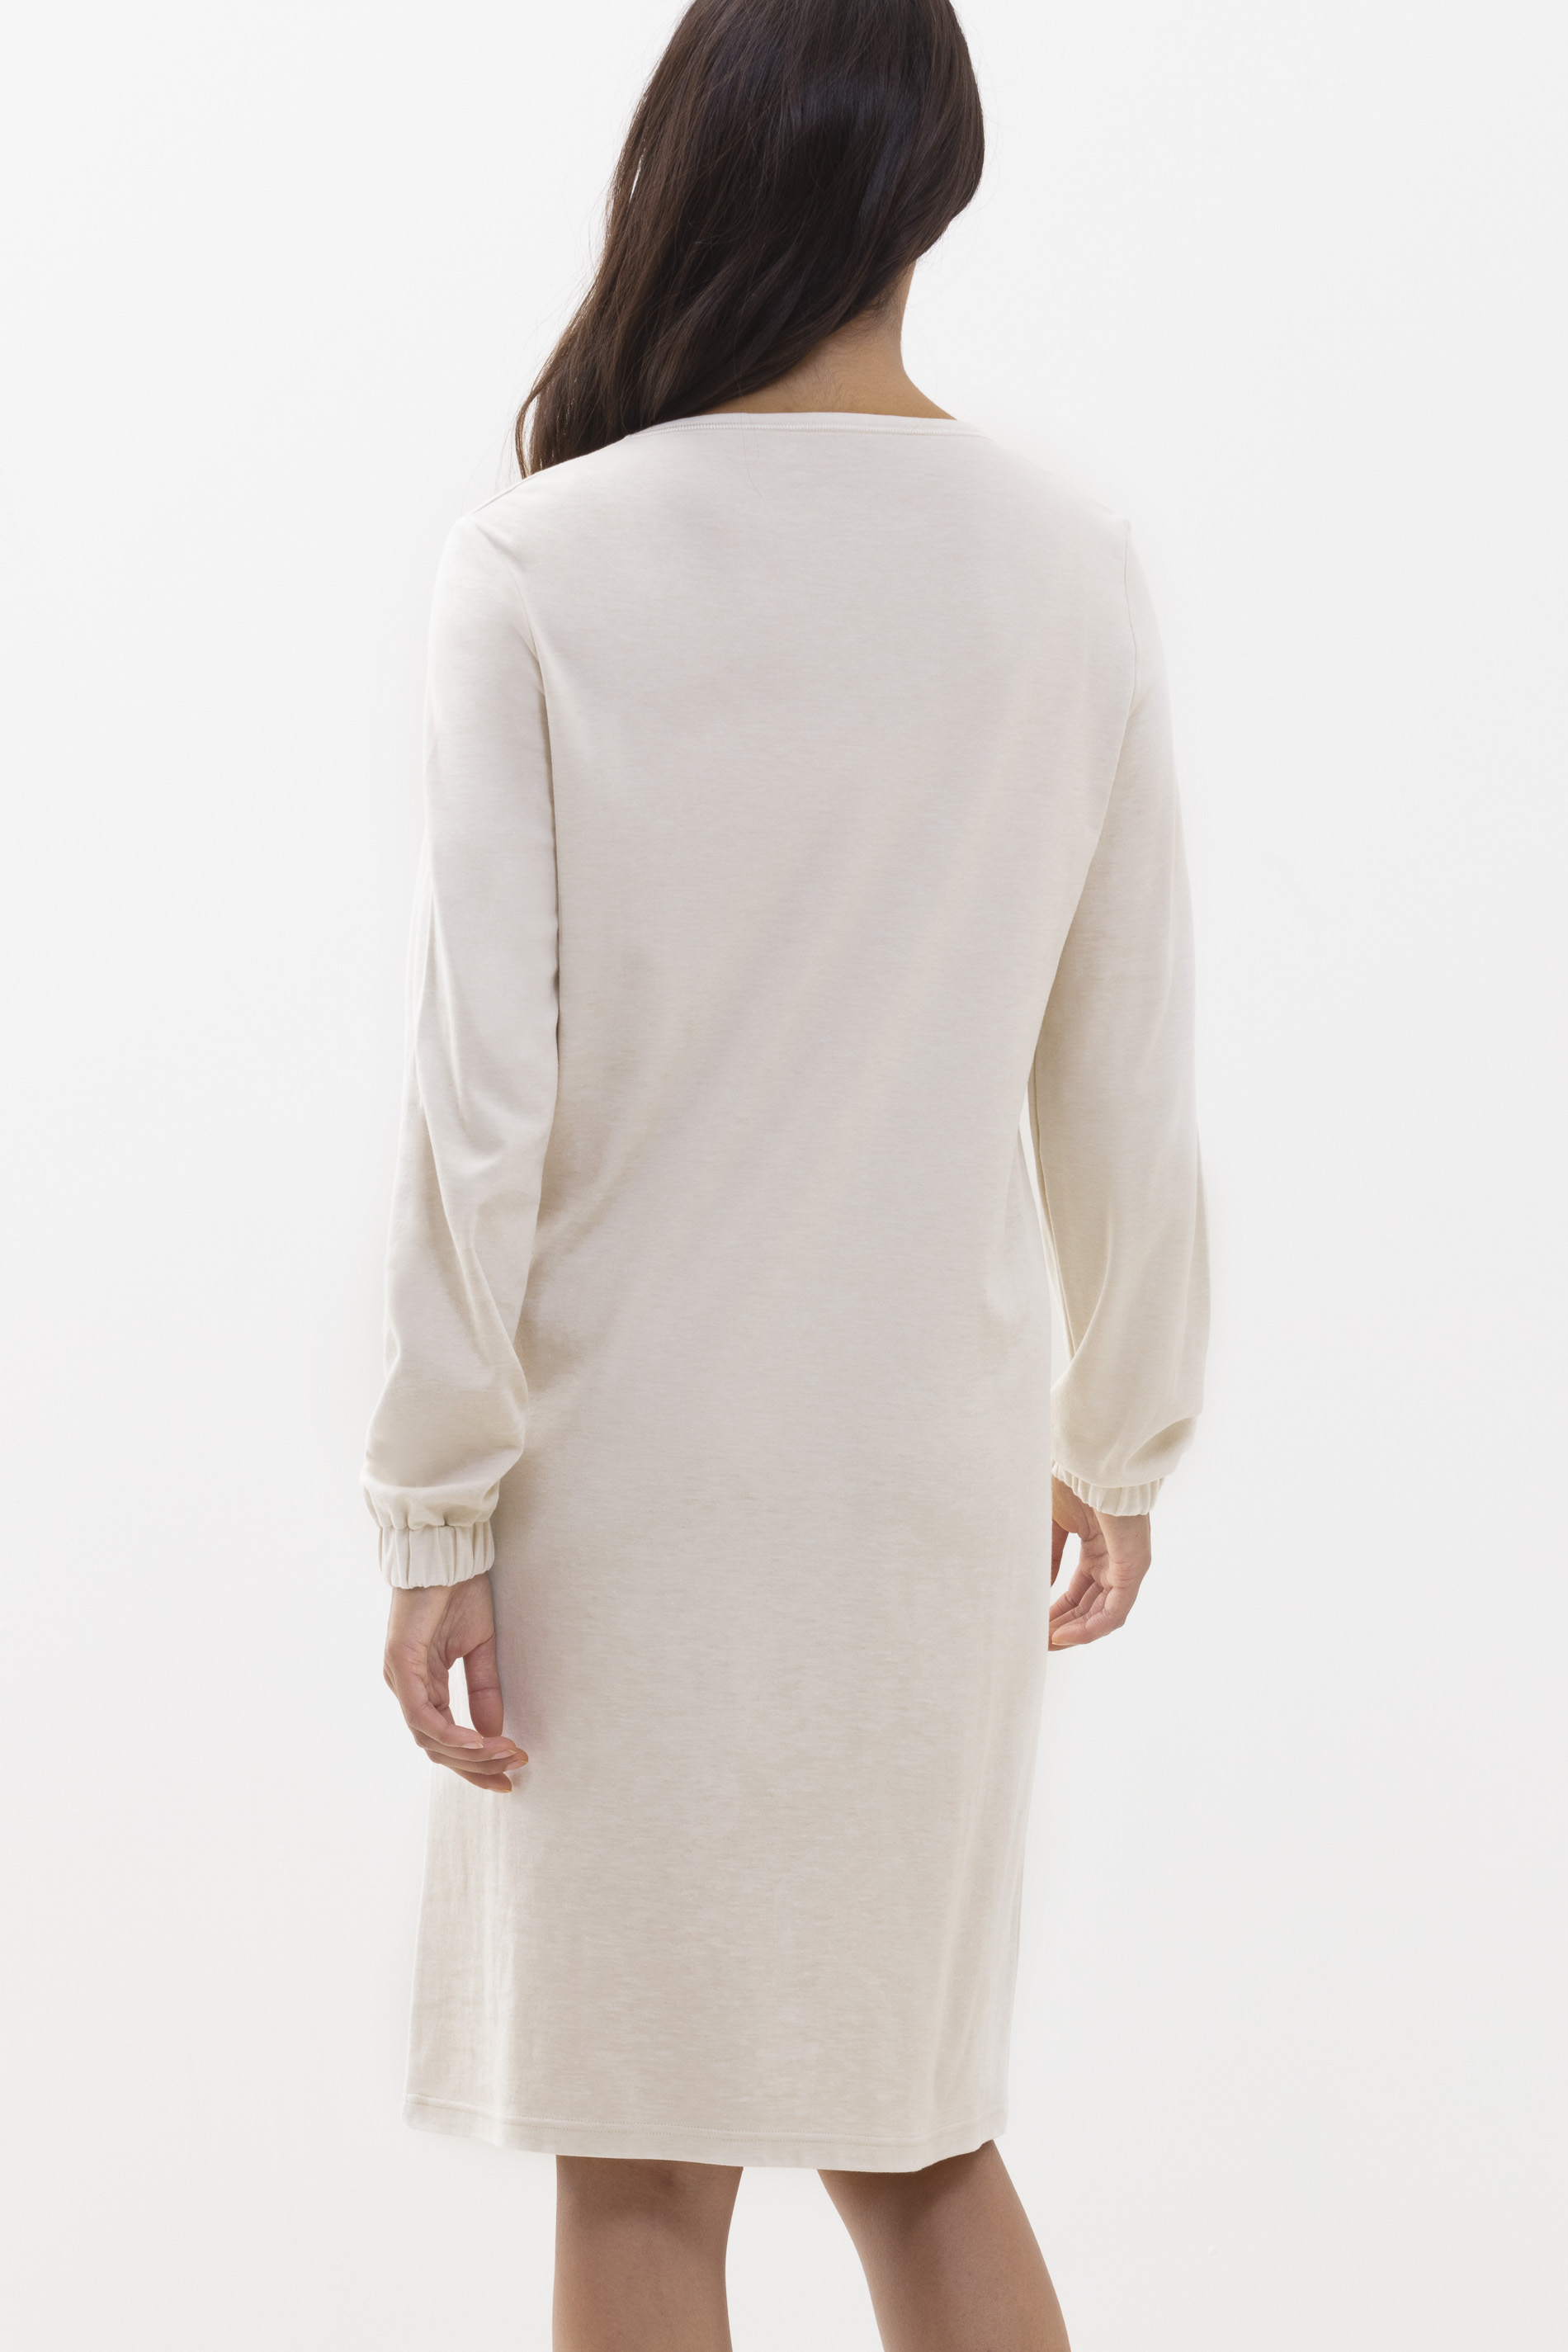 Nightshirt with full-length sleeves Natural Serie N8TEX 2.0 Rear View | mey®